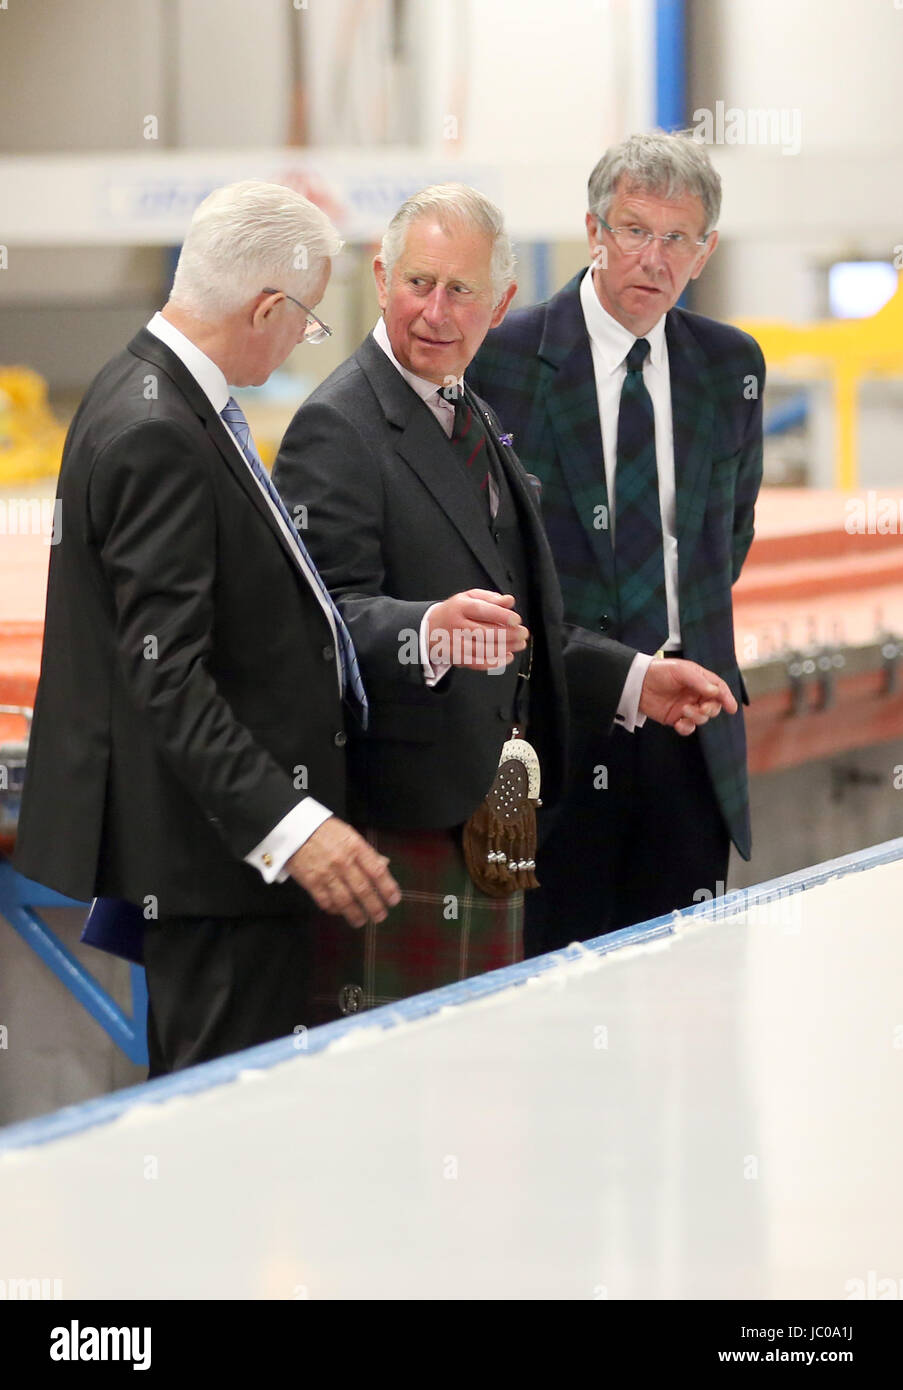 The Prince of Wales, known as the Duke of Rothesay while in Scotland, meets managing directors Peter Gray (left) and James Gray (right) during a visit to Gray and Adams Limited in Fraserburgh. The company which makes refrigerated vehicles celebrates it's 60th anniversary. Stock Photo